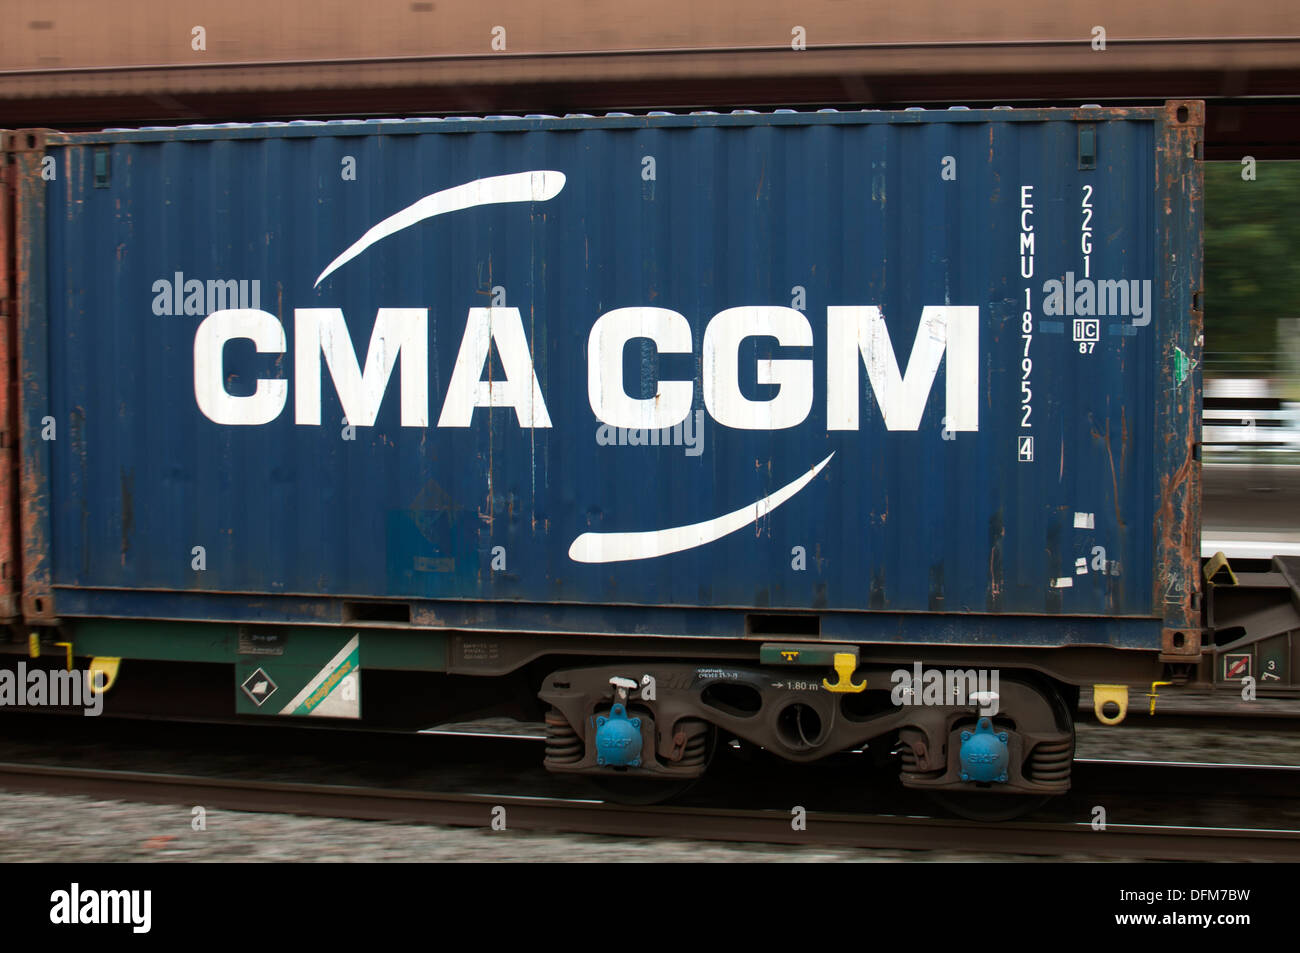 CMA CGM shipping container on a train, UK Stock Photo